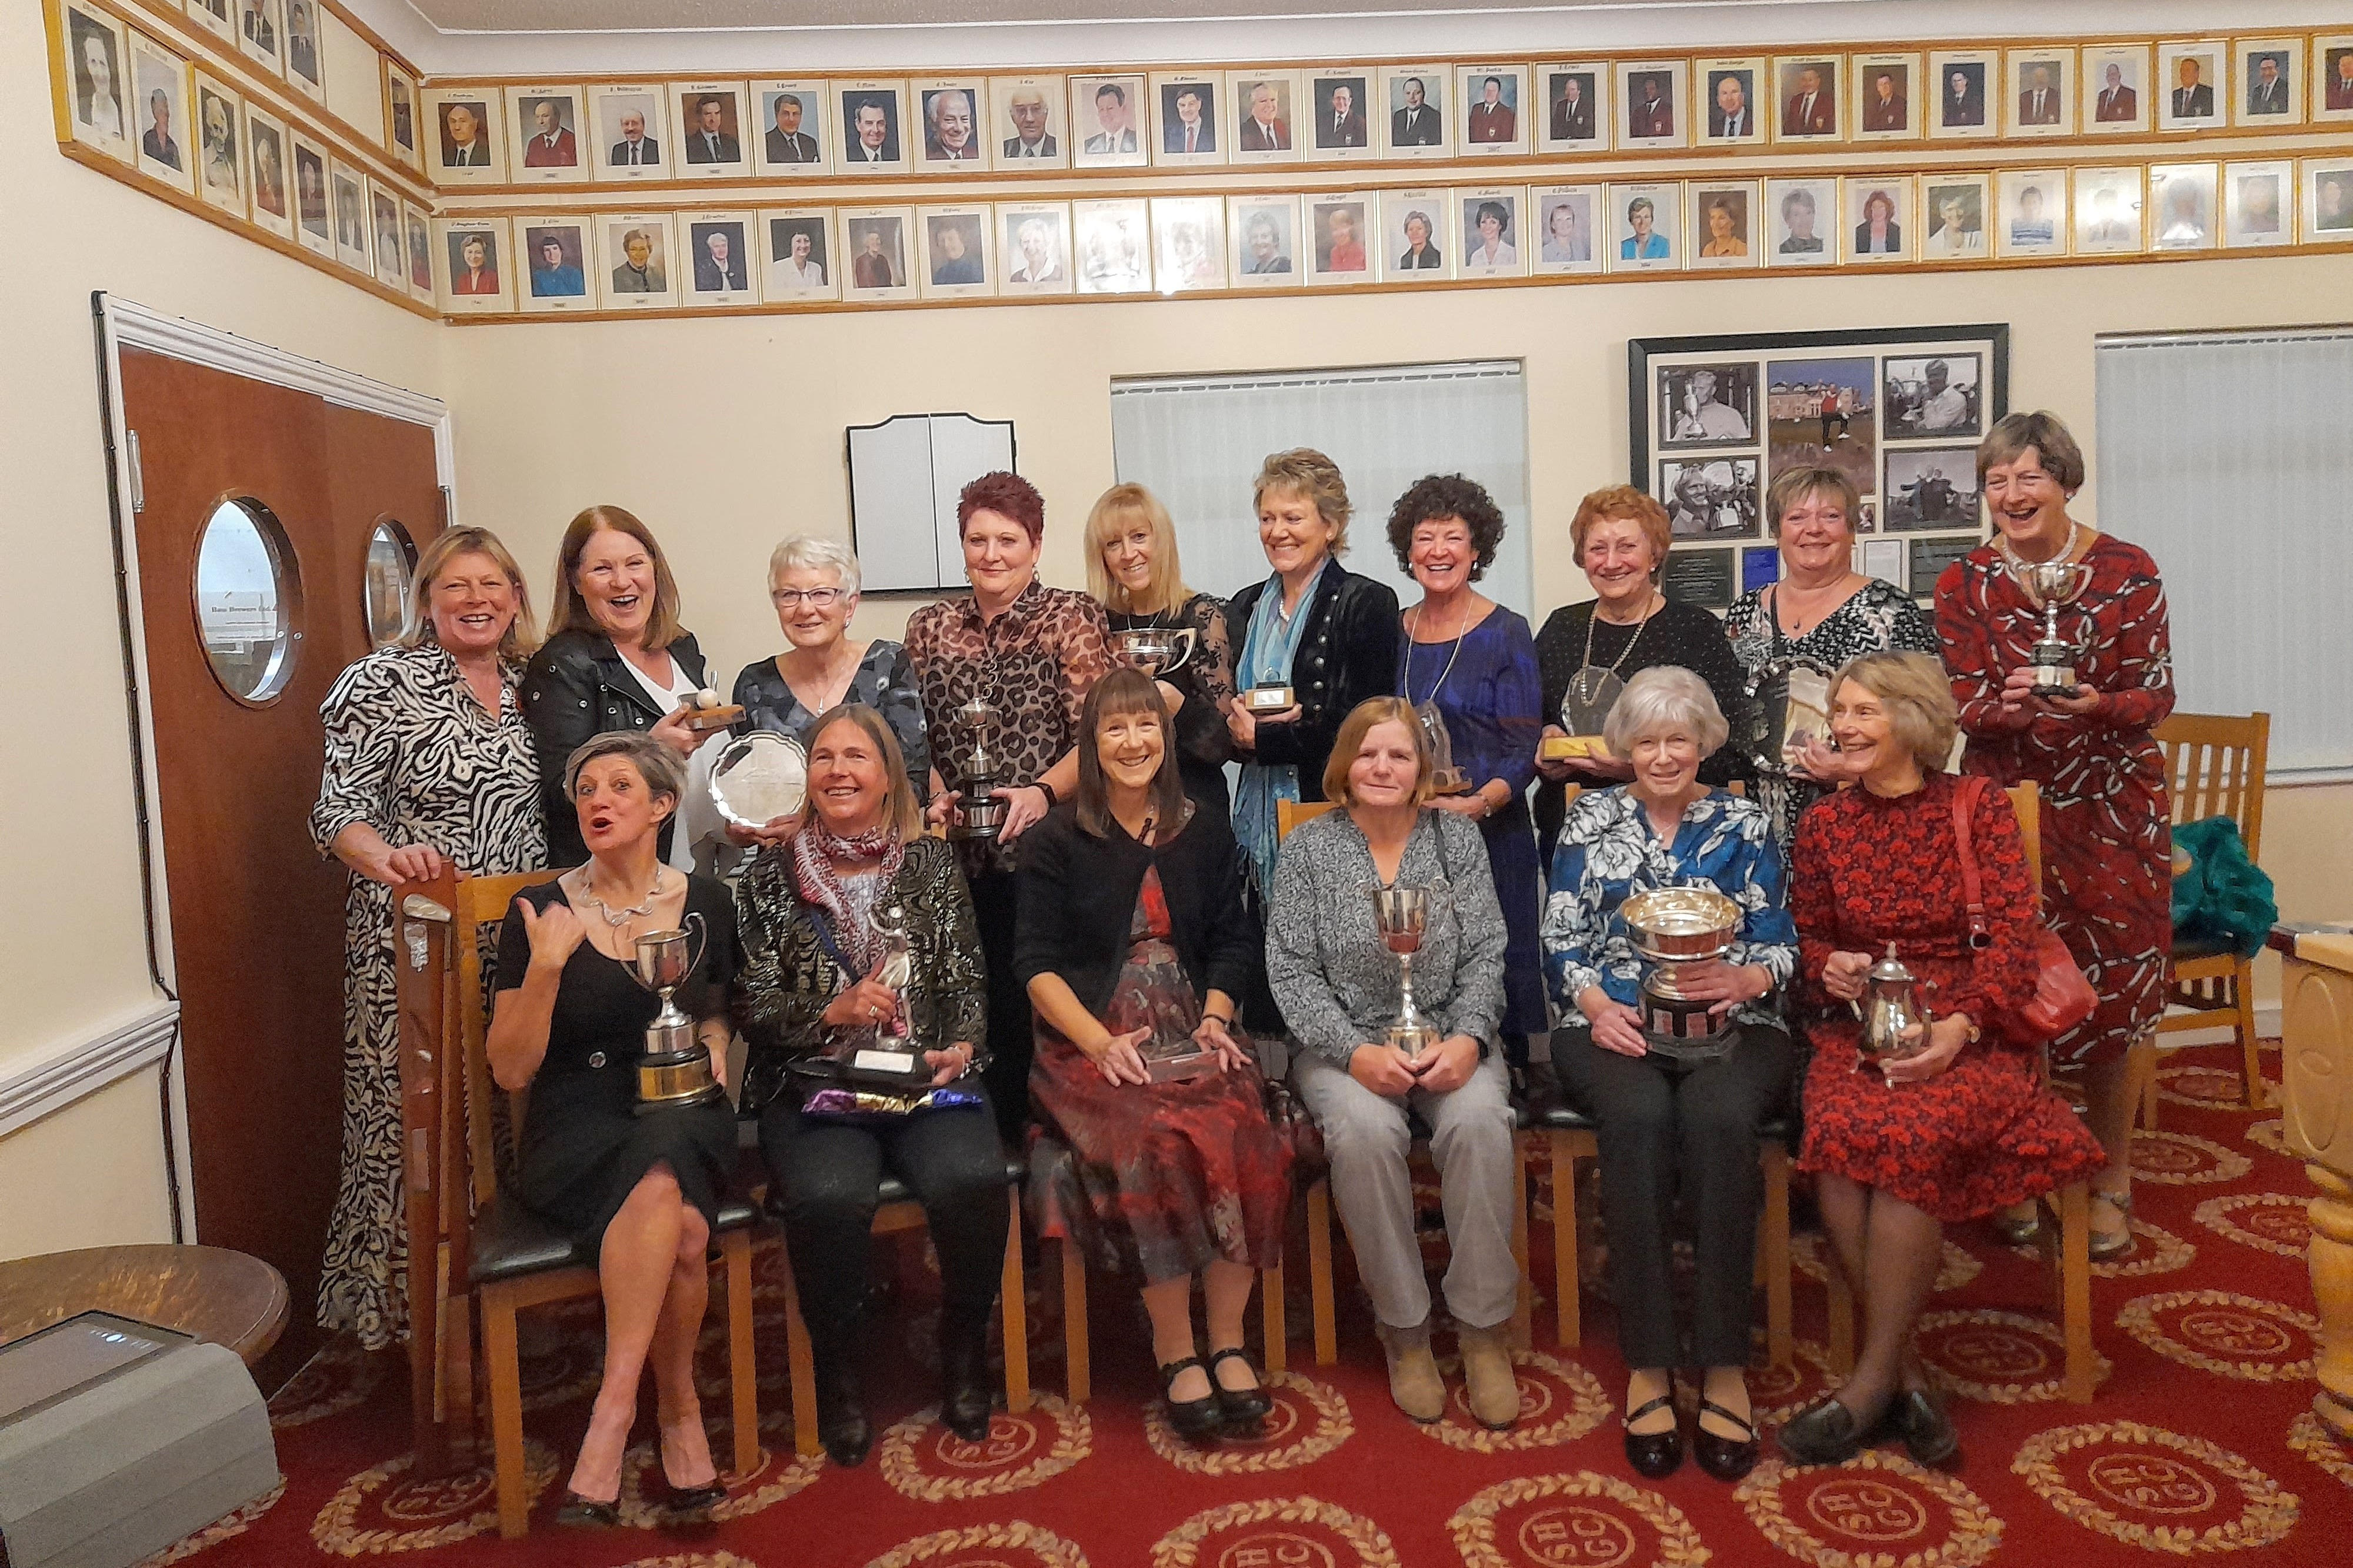 Ladies Presentation Evening 5th. November 2021: Niki Robertson won 5 trophies and a Joint Trophy with Brenda Cartwright for the Gabbett Foursomes. Back Row L to R: Nicky Pearce, Jo Gelder, Anne Andrews, Mandy Pritchard (Lady Captain), Lin Pullen, Lindsay Hilton, Sue Slate, Olive French, Pam Savage, Jill Elliott.  Front Row L to R: Niki Robertson, Veronica Higgins, Jenny Meredith, An Crawley, Brenda Cartwright, Helen Finnigan.